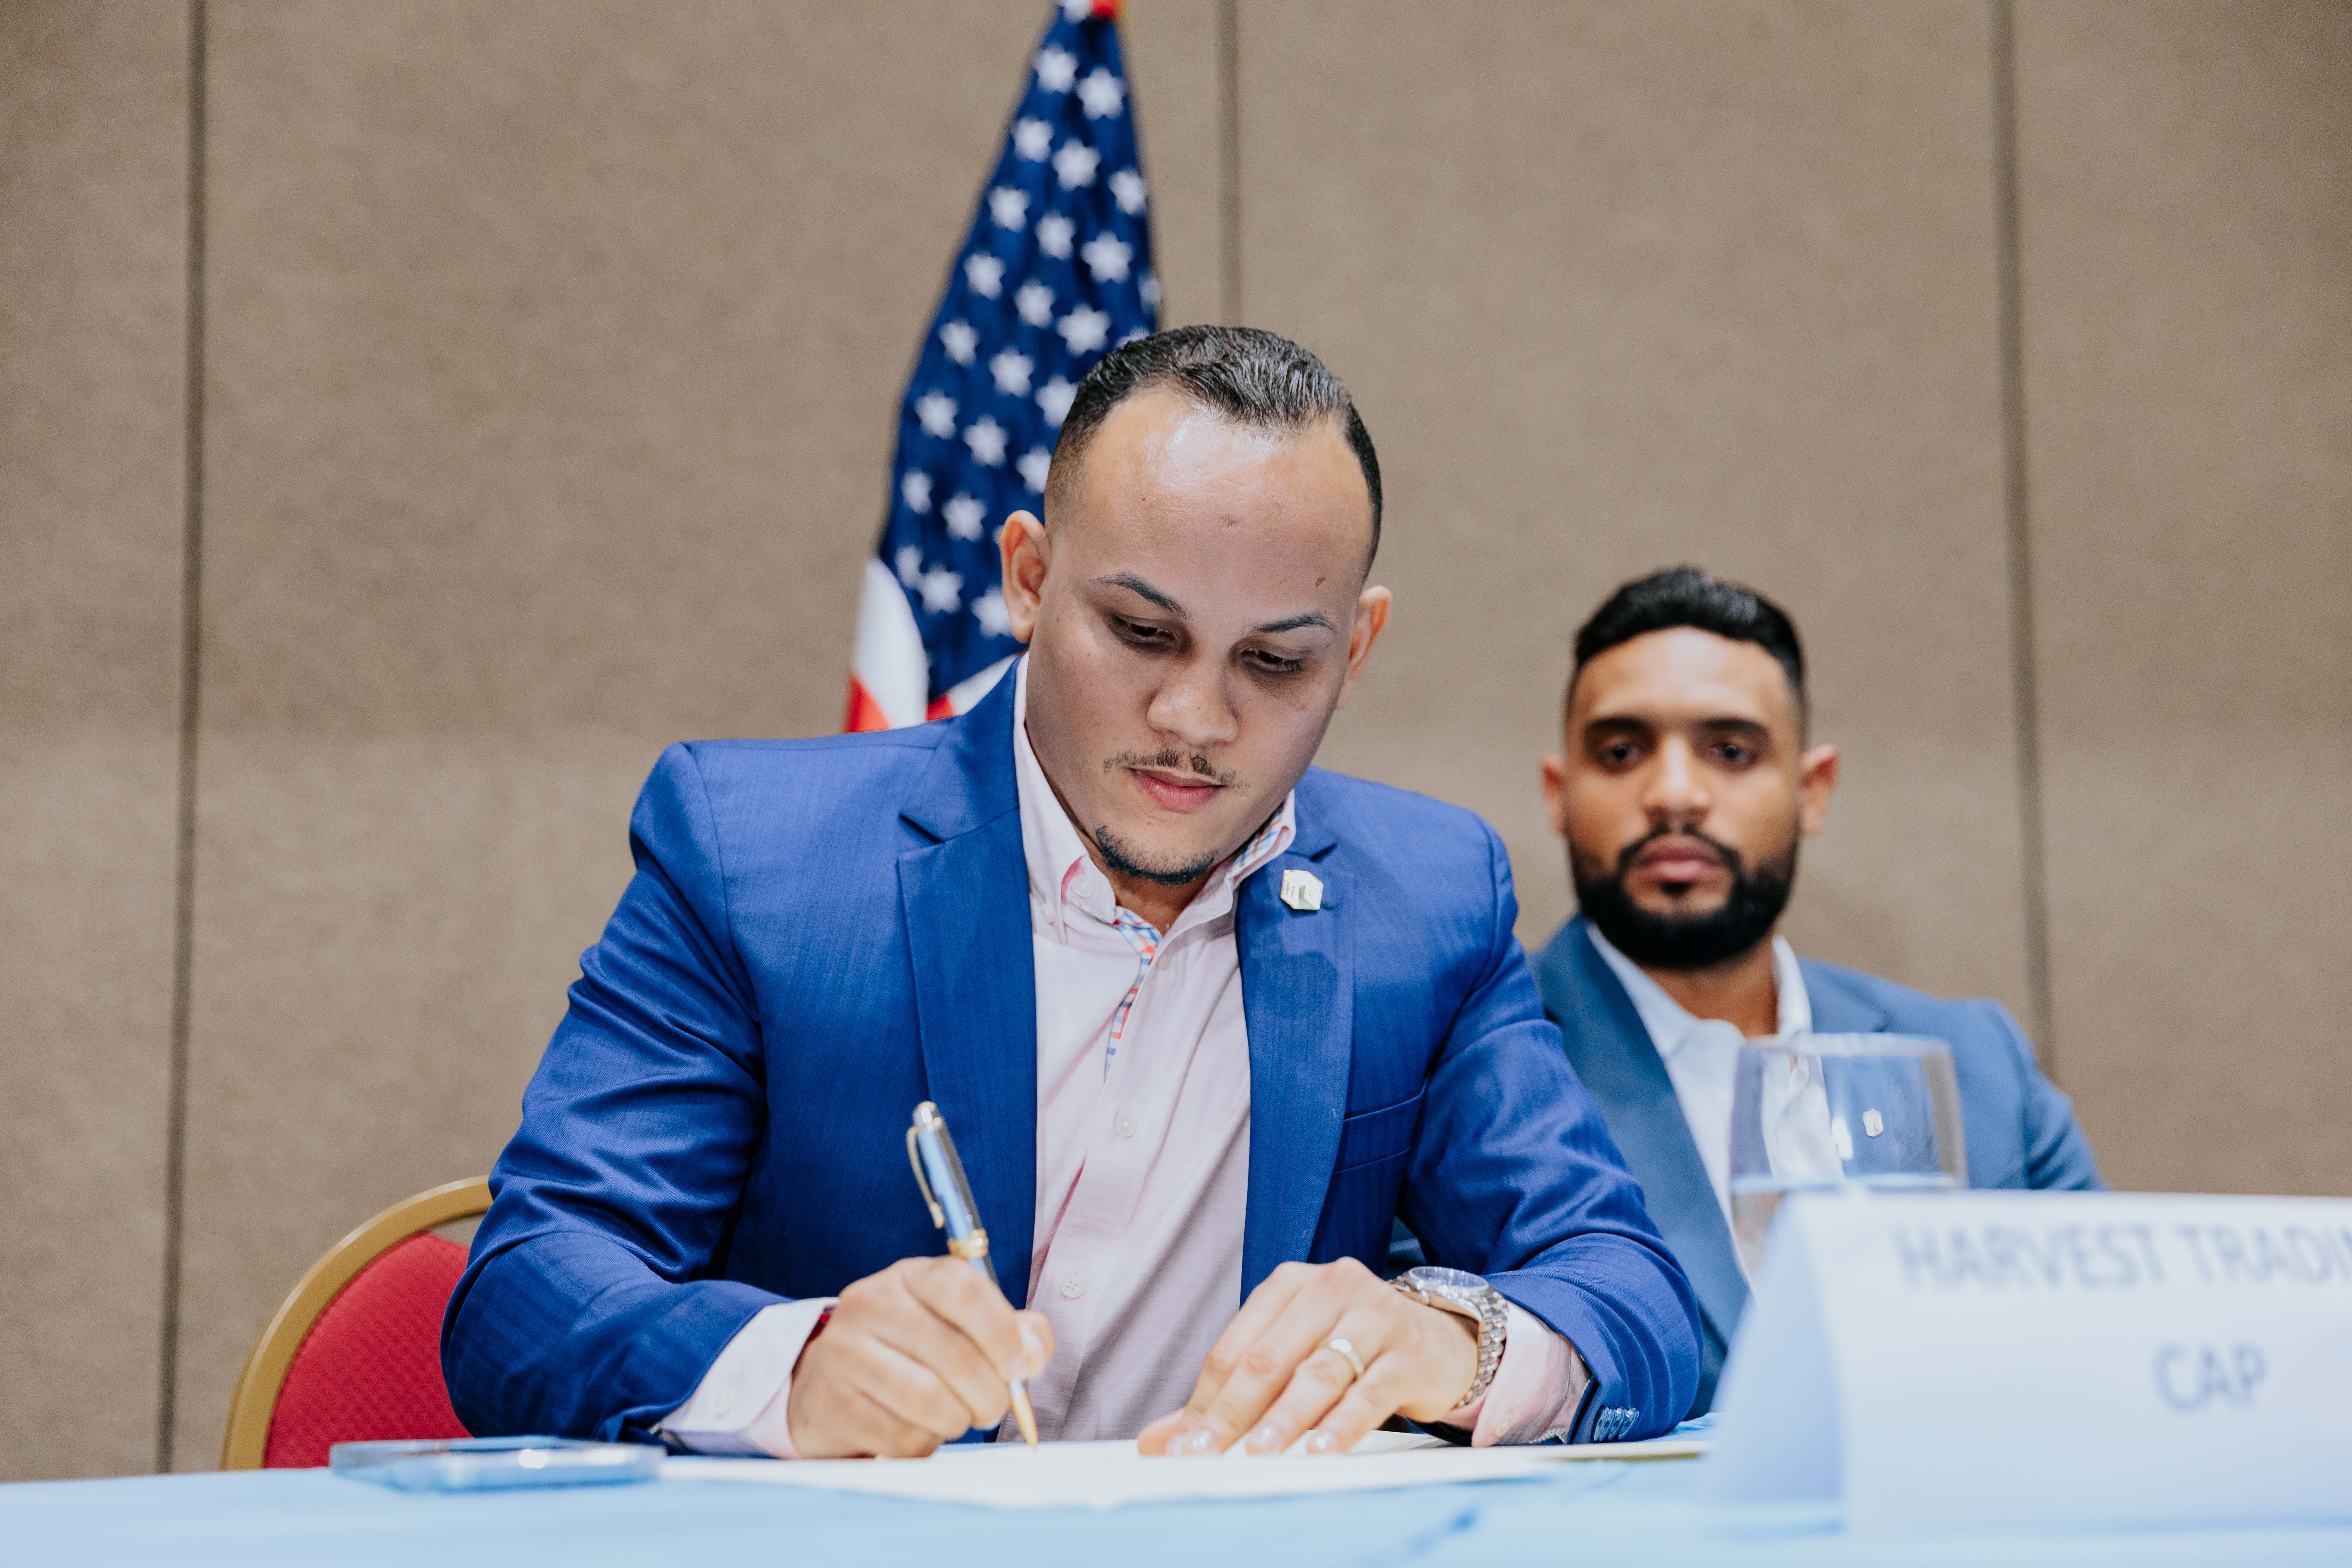 Jairo Gonzalez signs the Bilateral Agreement that will change the lives of many people.